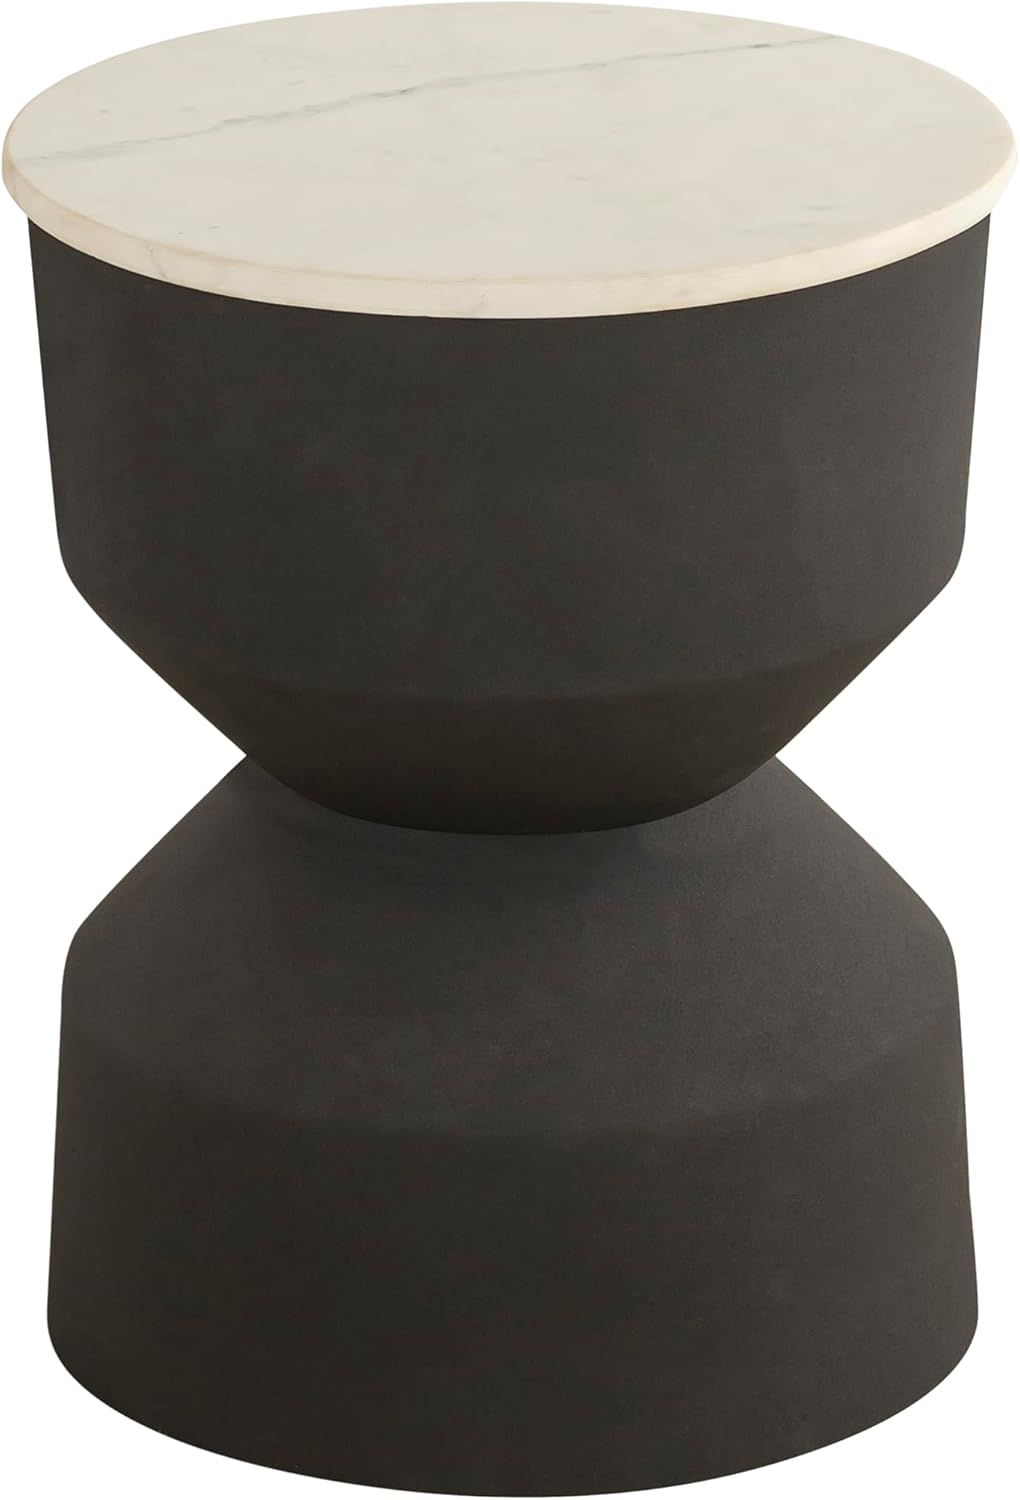 Modern Side Table with White Marble Top and Textured Hourglass Metal Frame, Black | Amazon (US)